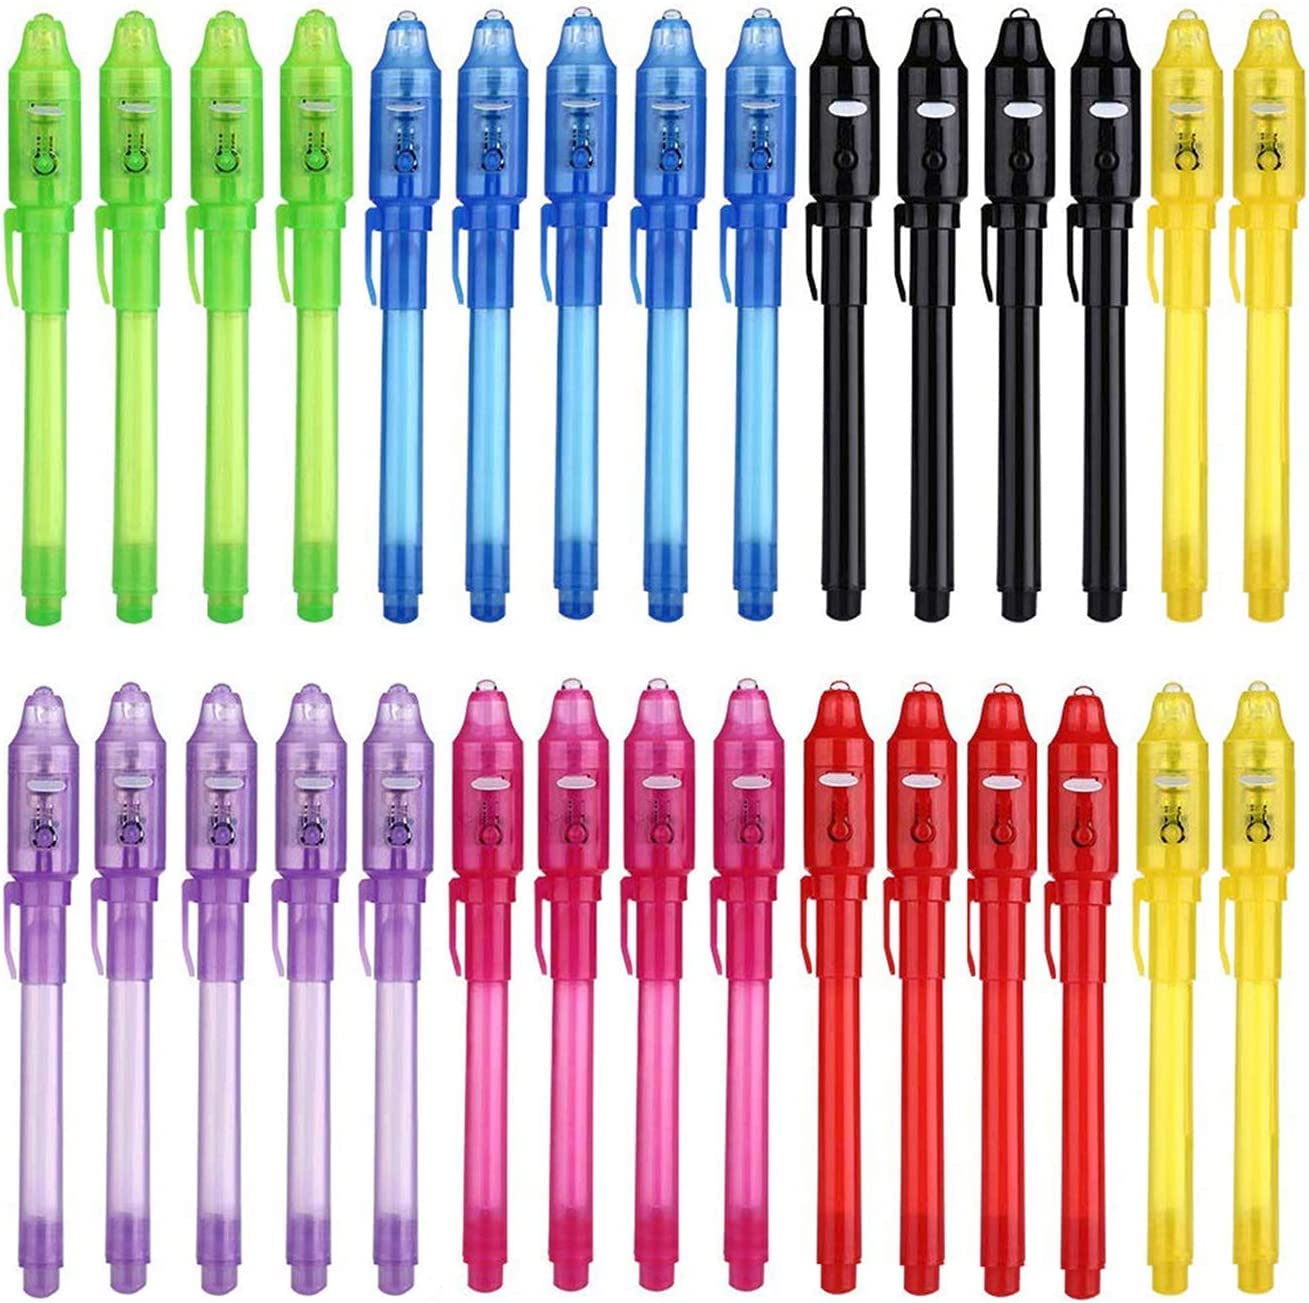 DazSpirit 30pcs Invisible Ink Pens with UV Light Party Bag Fillers for Boys and Girls, Magic Pen Disappearing Ink Pen for Kids, UV Pen for